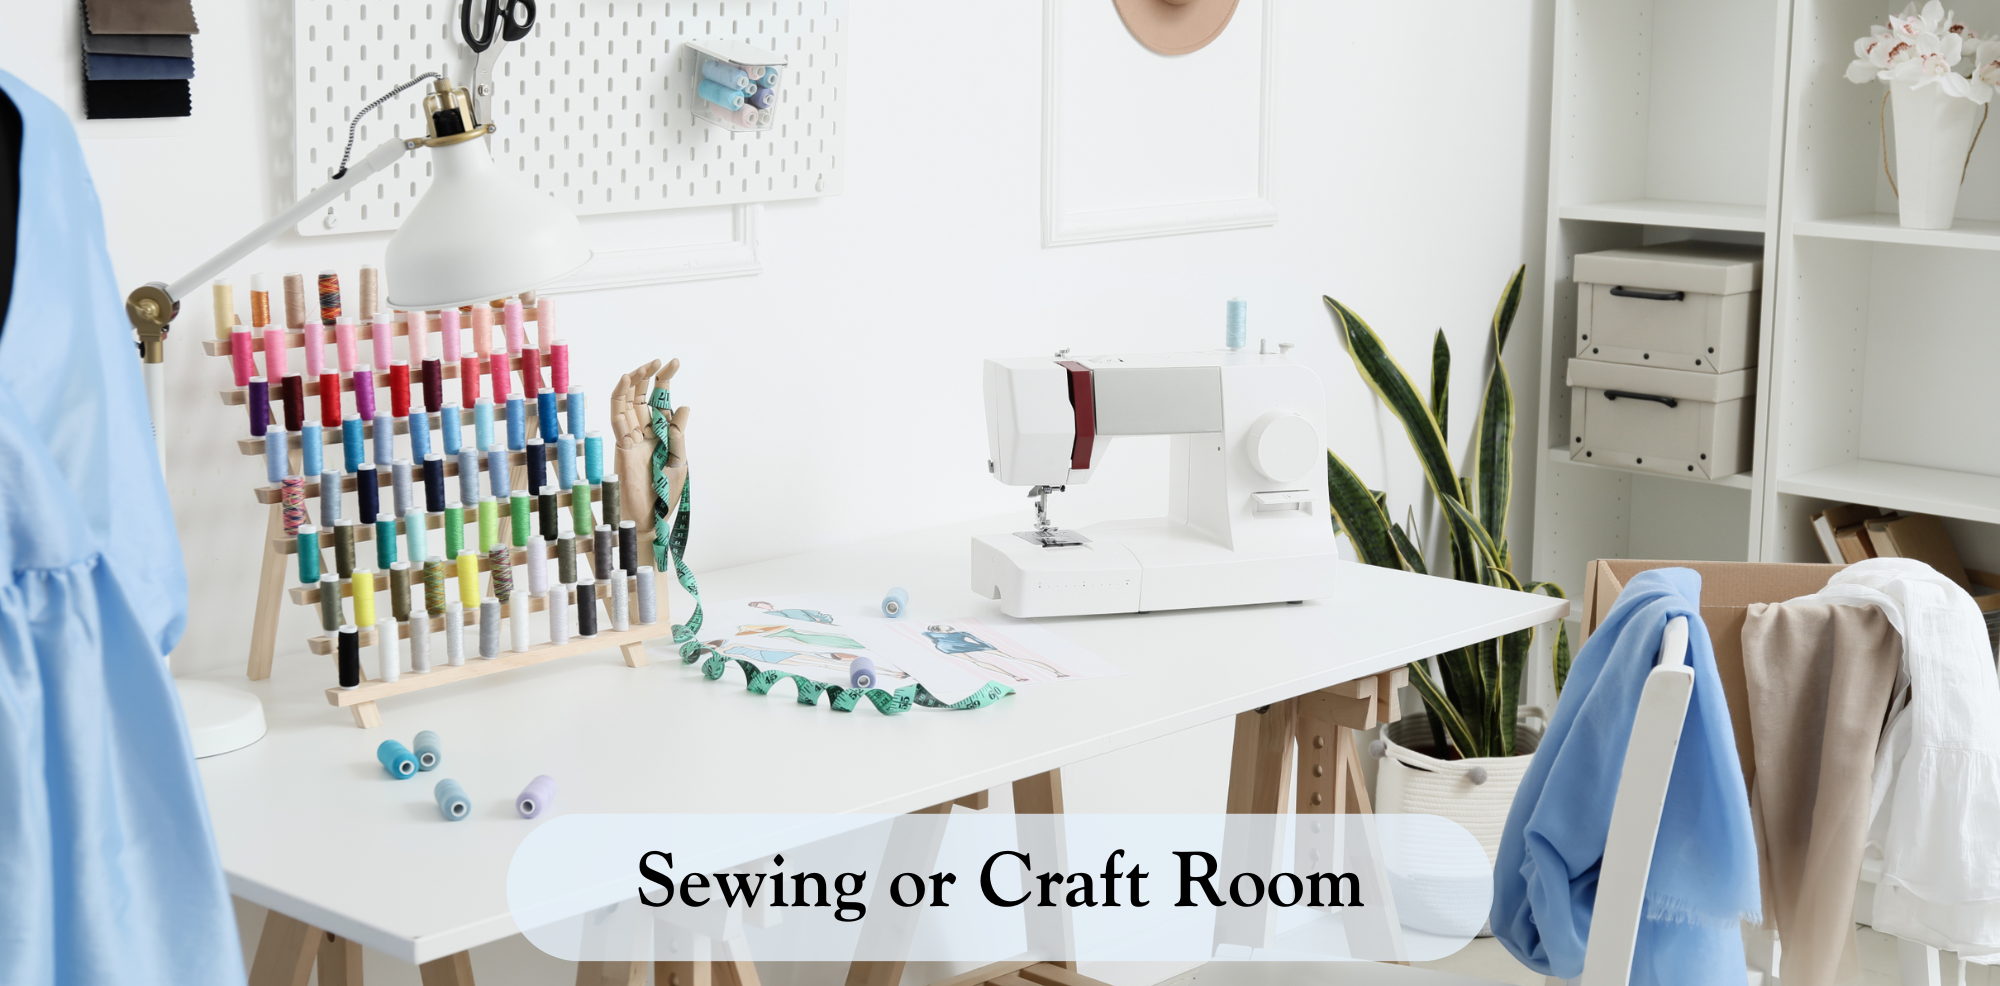 custom deigned and built craftroom/sewing room from Neatly Dunn Custom Spaces in Greenville